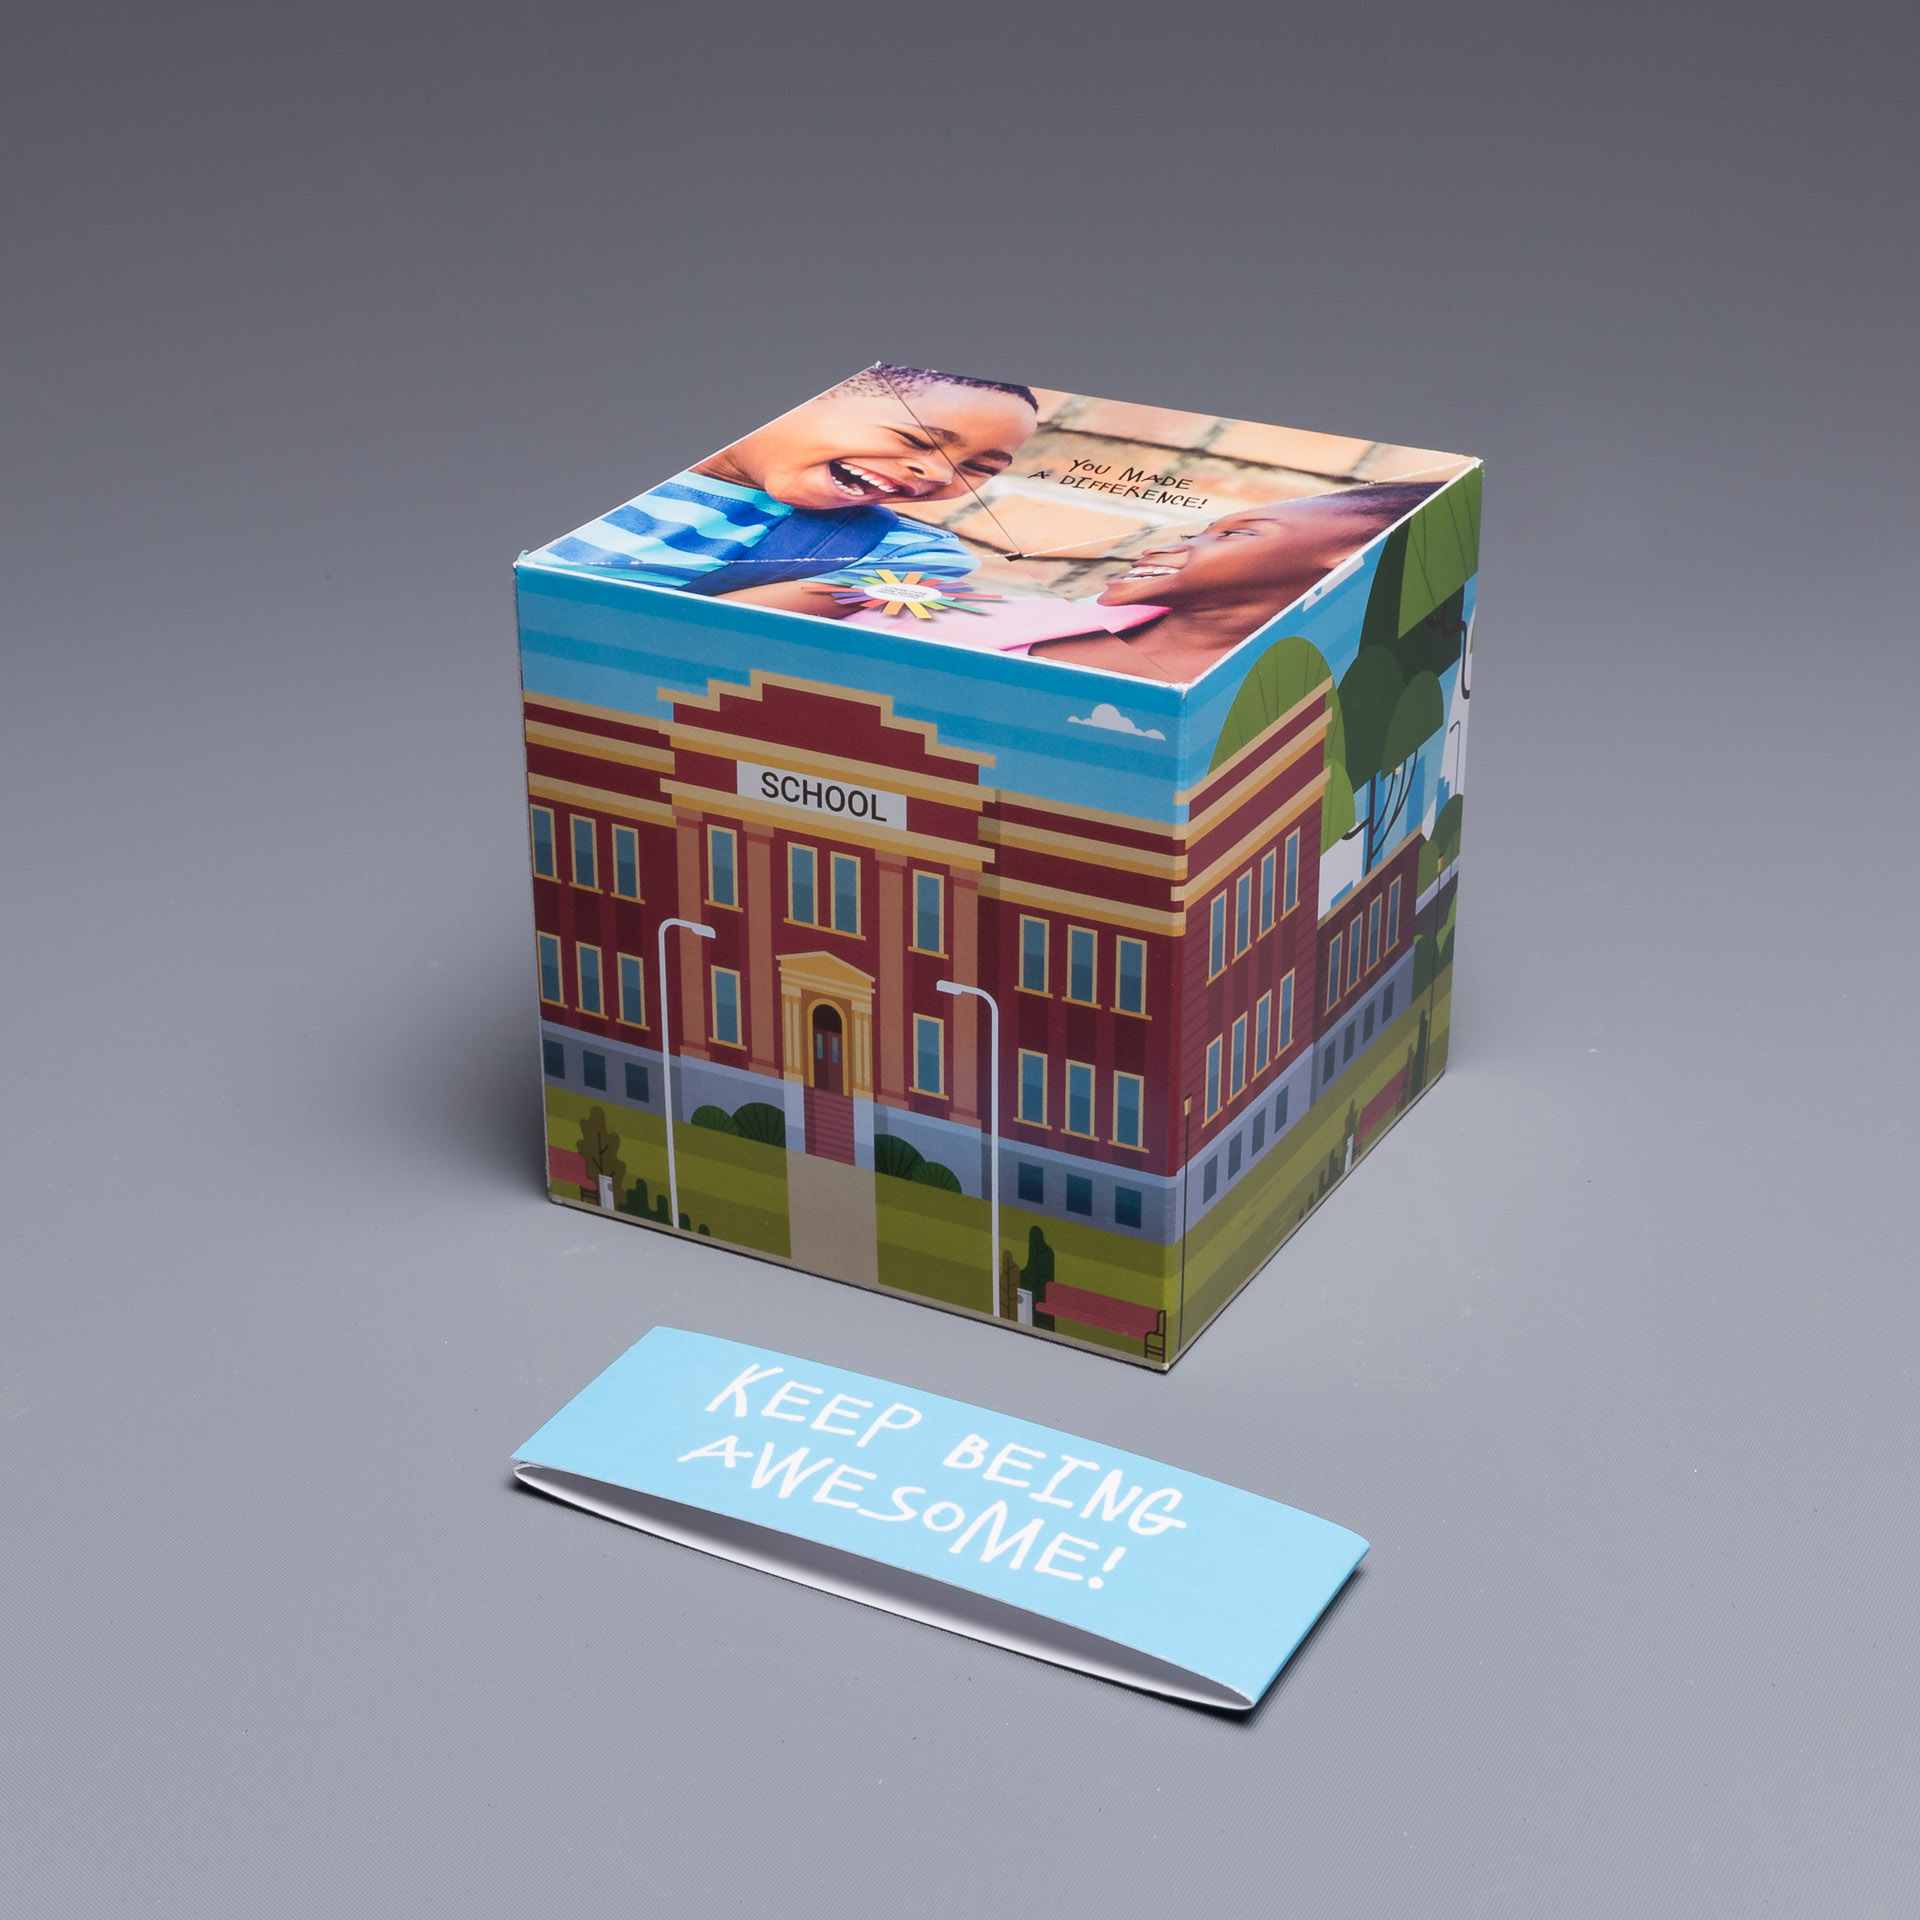 LookForTheGoodProject.Org uses the 4.25" Pop Up Cube for a Non-Profit Campaign